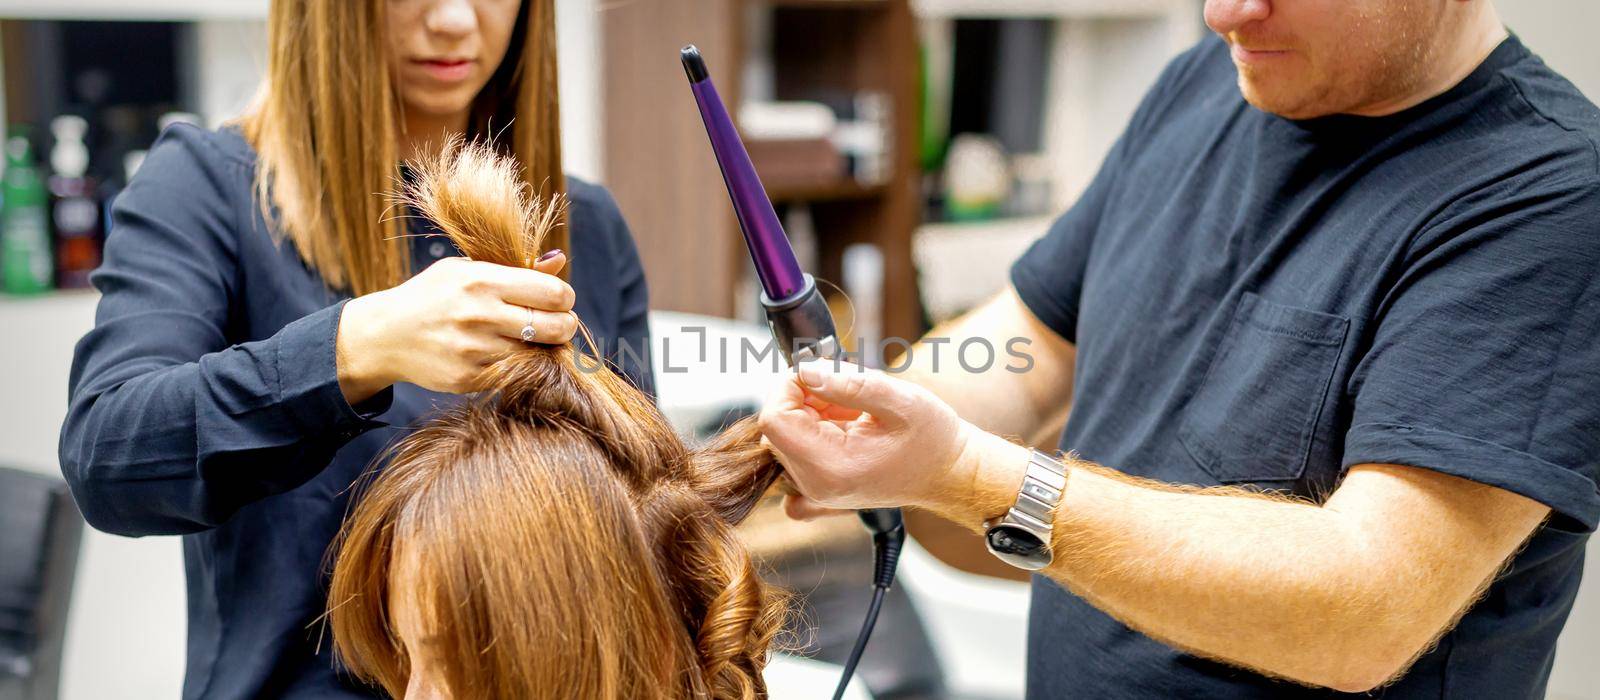 Two hairstylists using a curling iron on customers long brown hair in a beauty salon. by okskukuruza